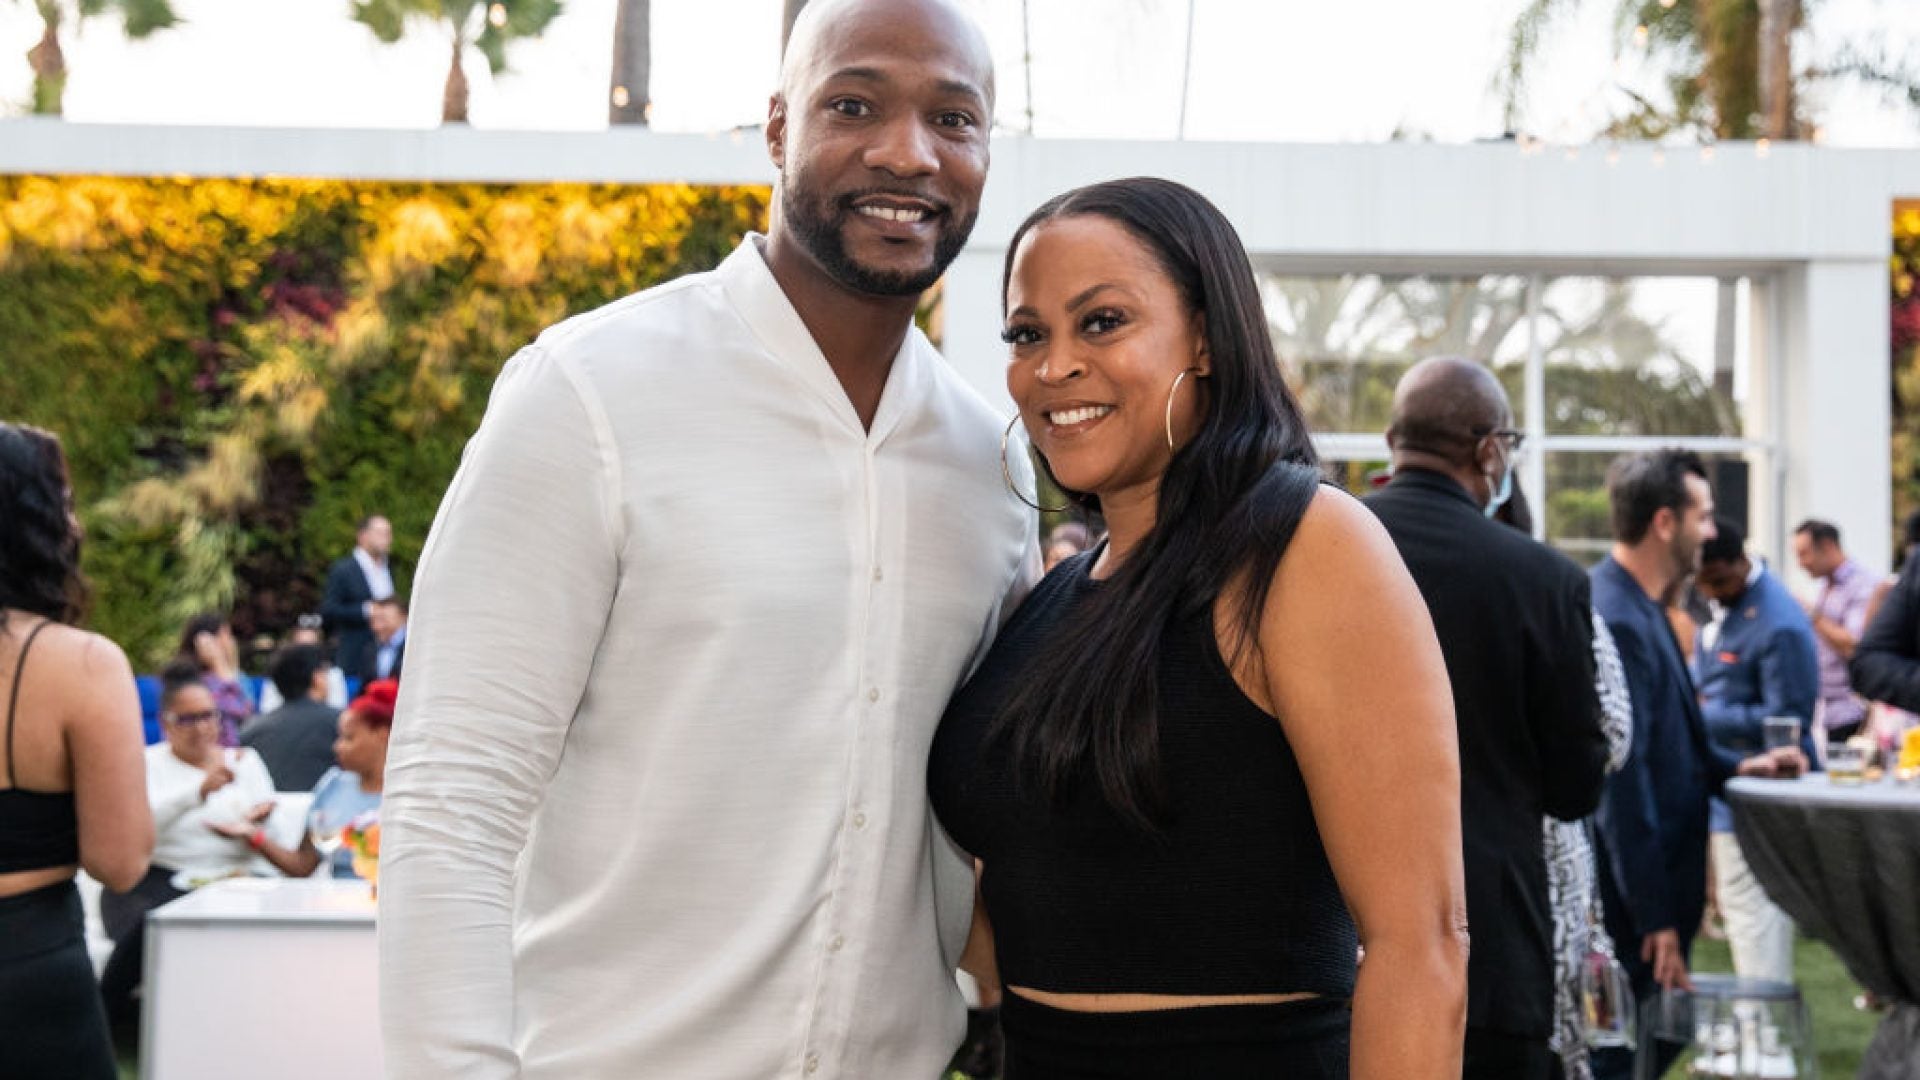 Shaunie O’Neal Says ‘Love Feels Peaceful And Easy’ With Fiancé Pastor Keion Henderson